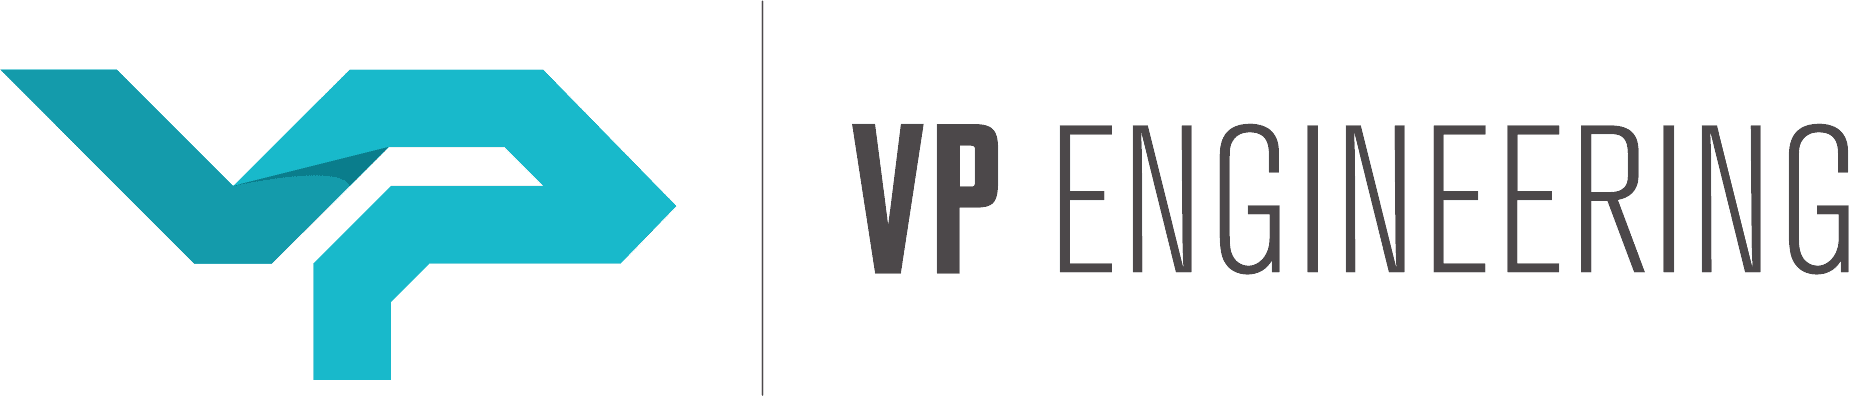 Vp engineering logo on a green background.